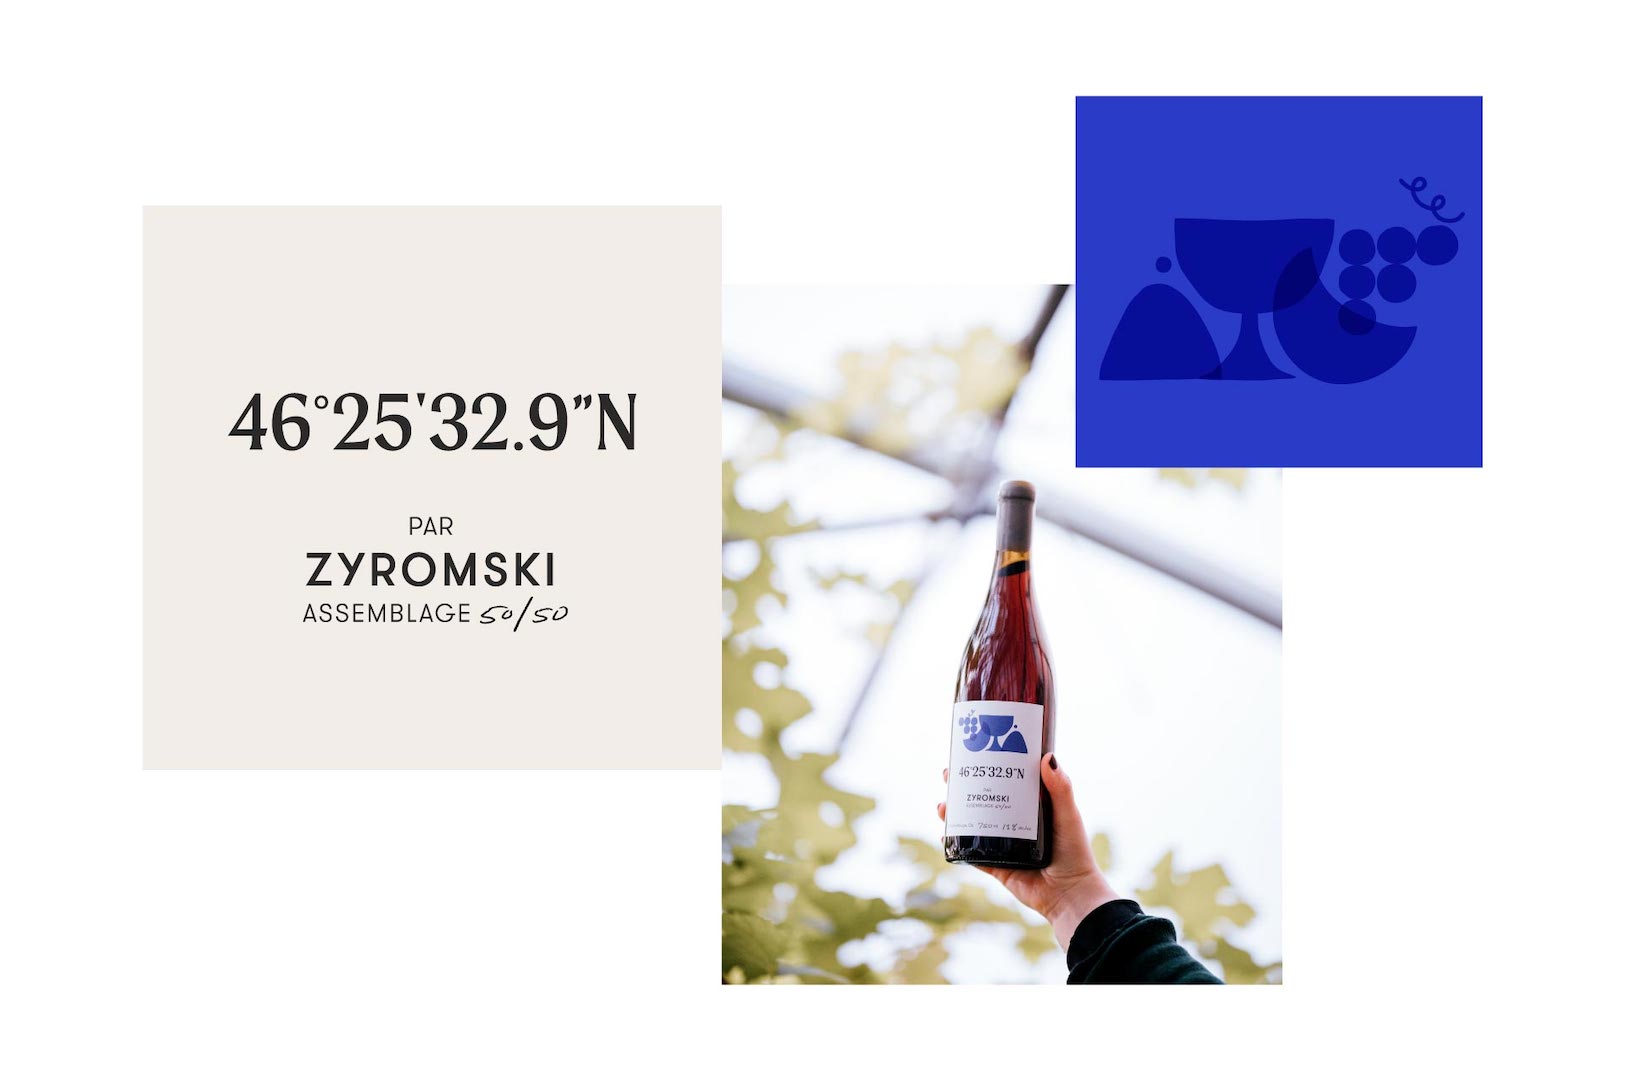 Label on the bottle of 46°25'32.9"N wine with blue graphic elements reminding of a glass and fruits